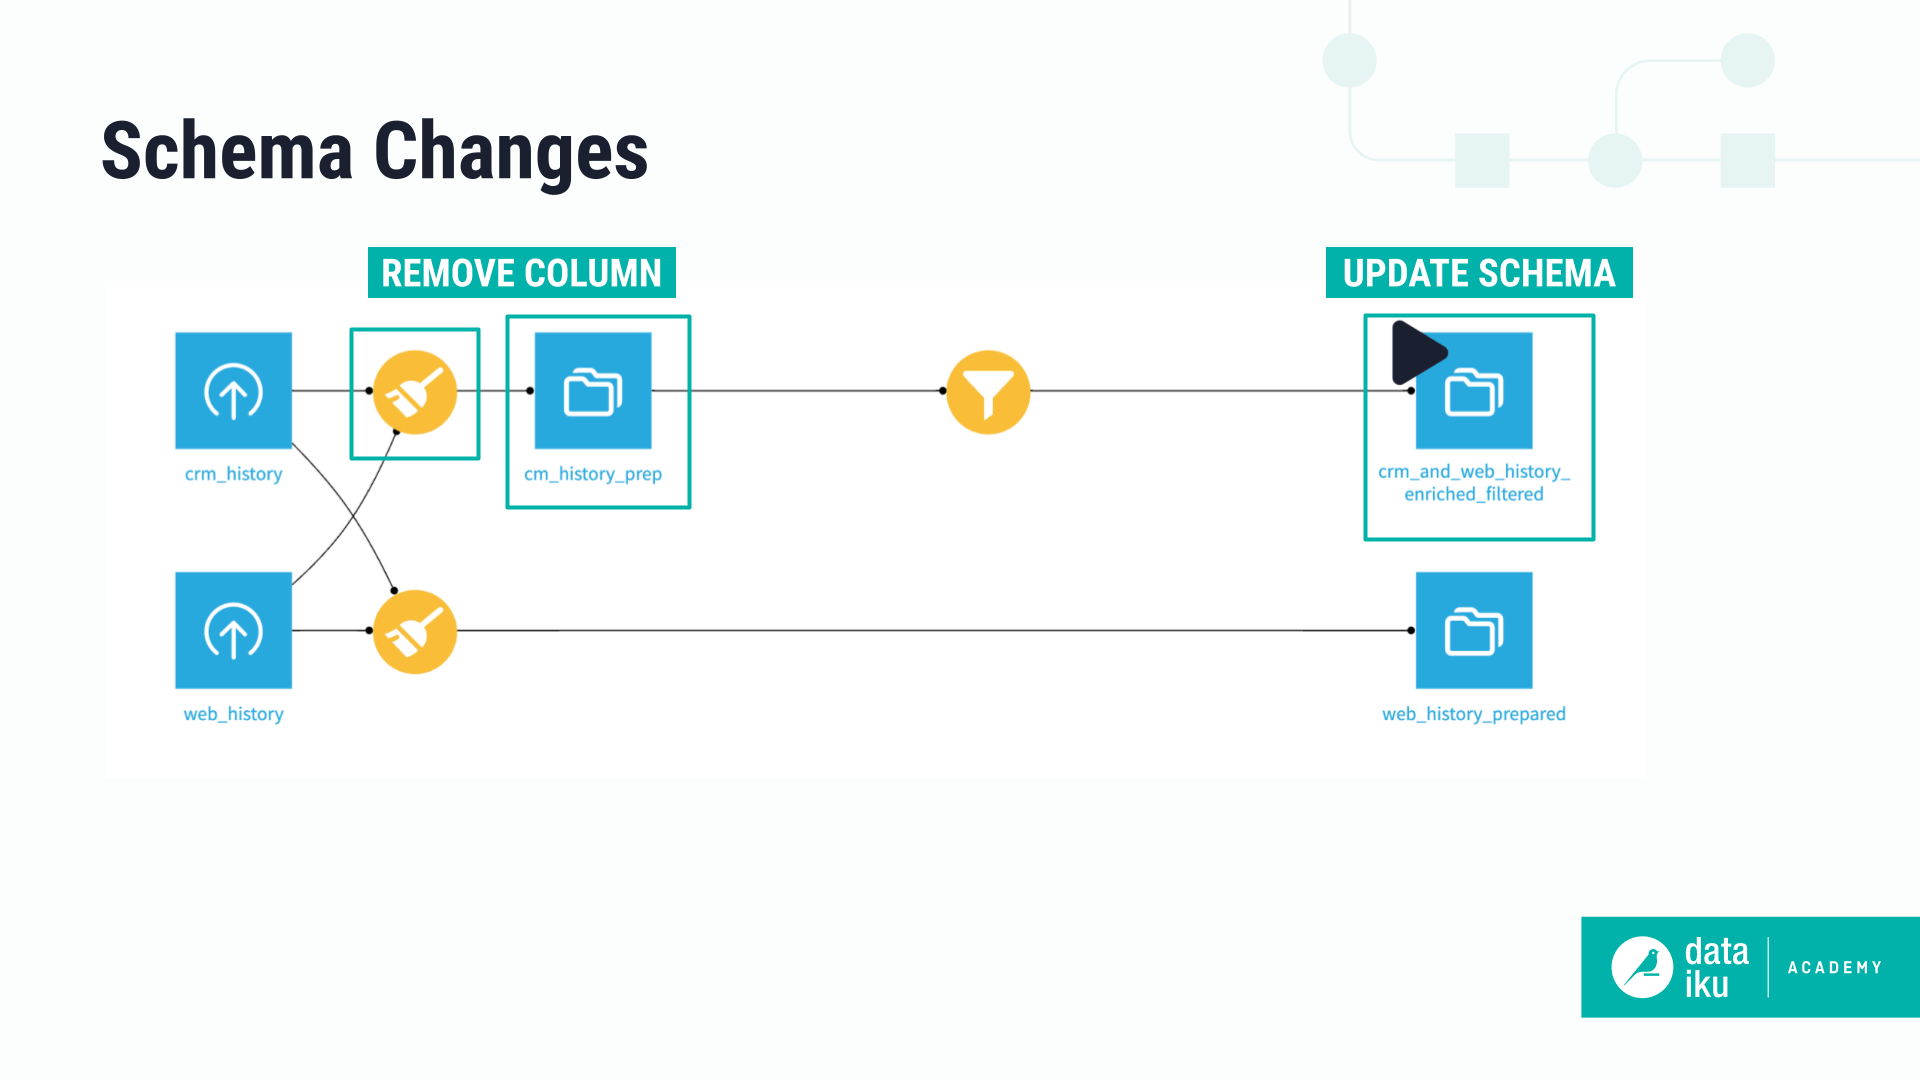 Slide showing one type of schema change, or removing a column, that would require a schema update.